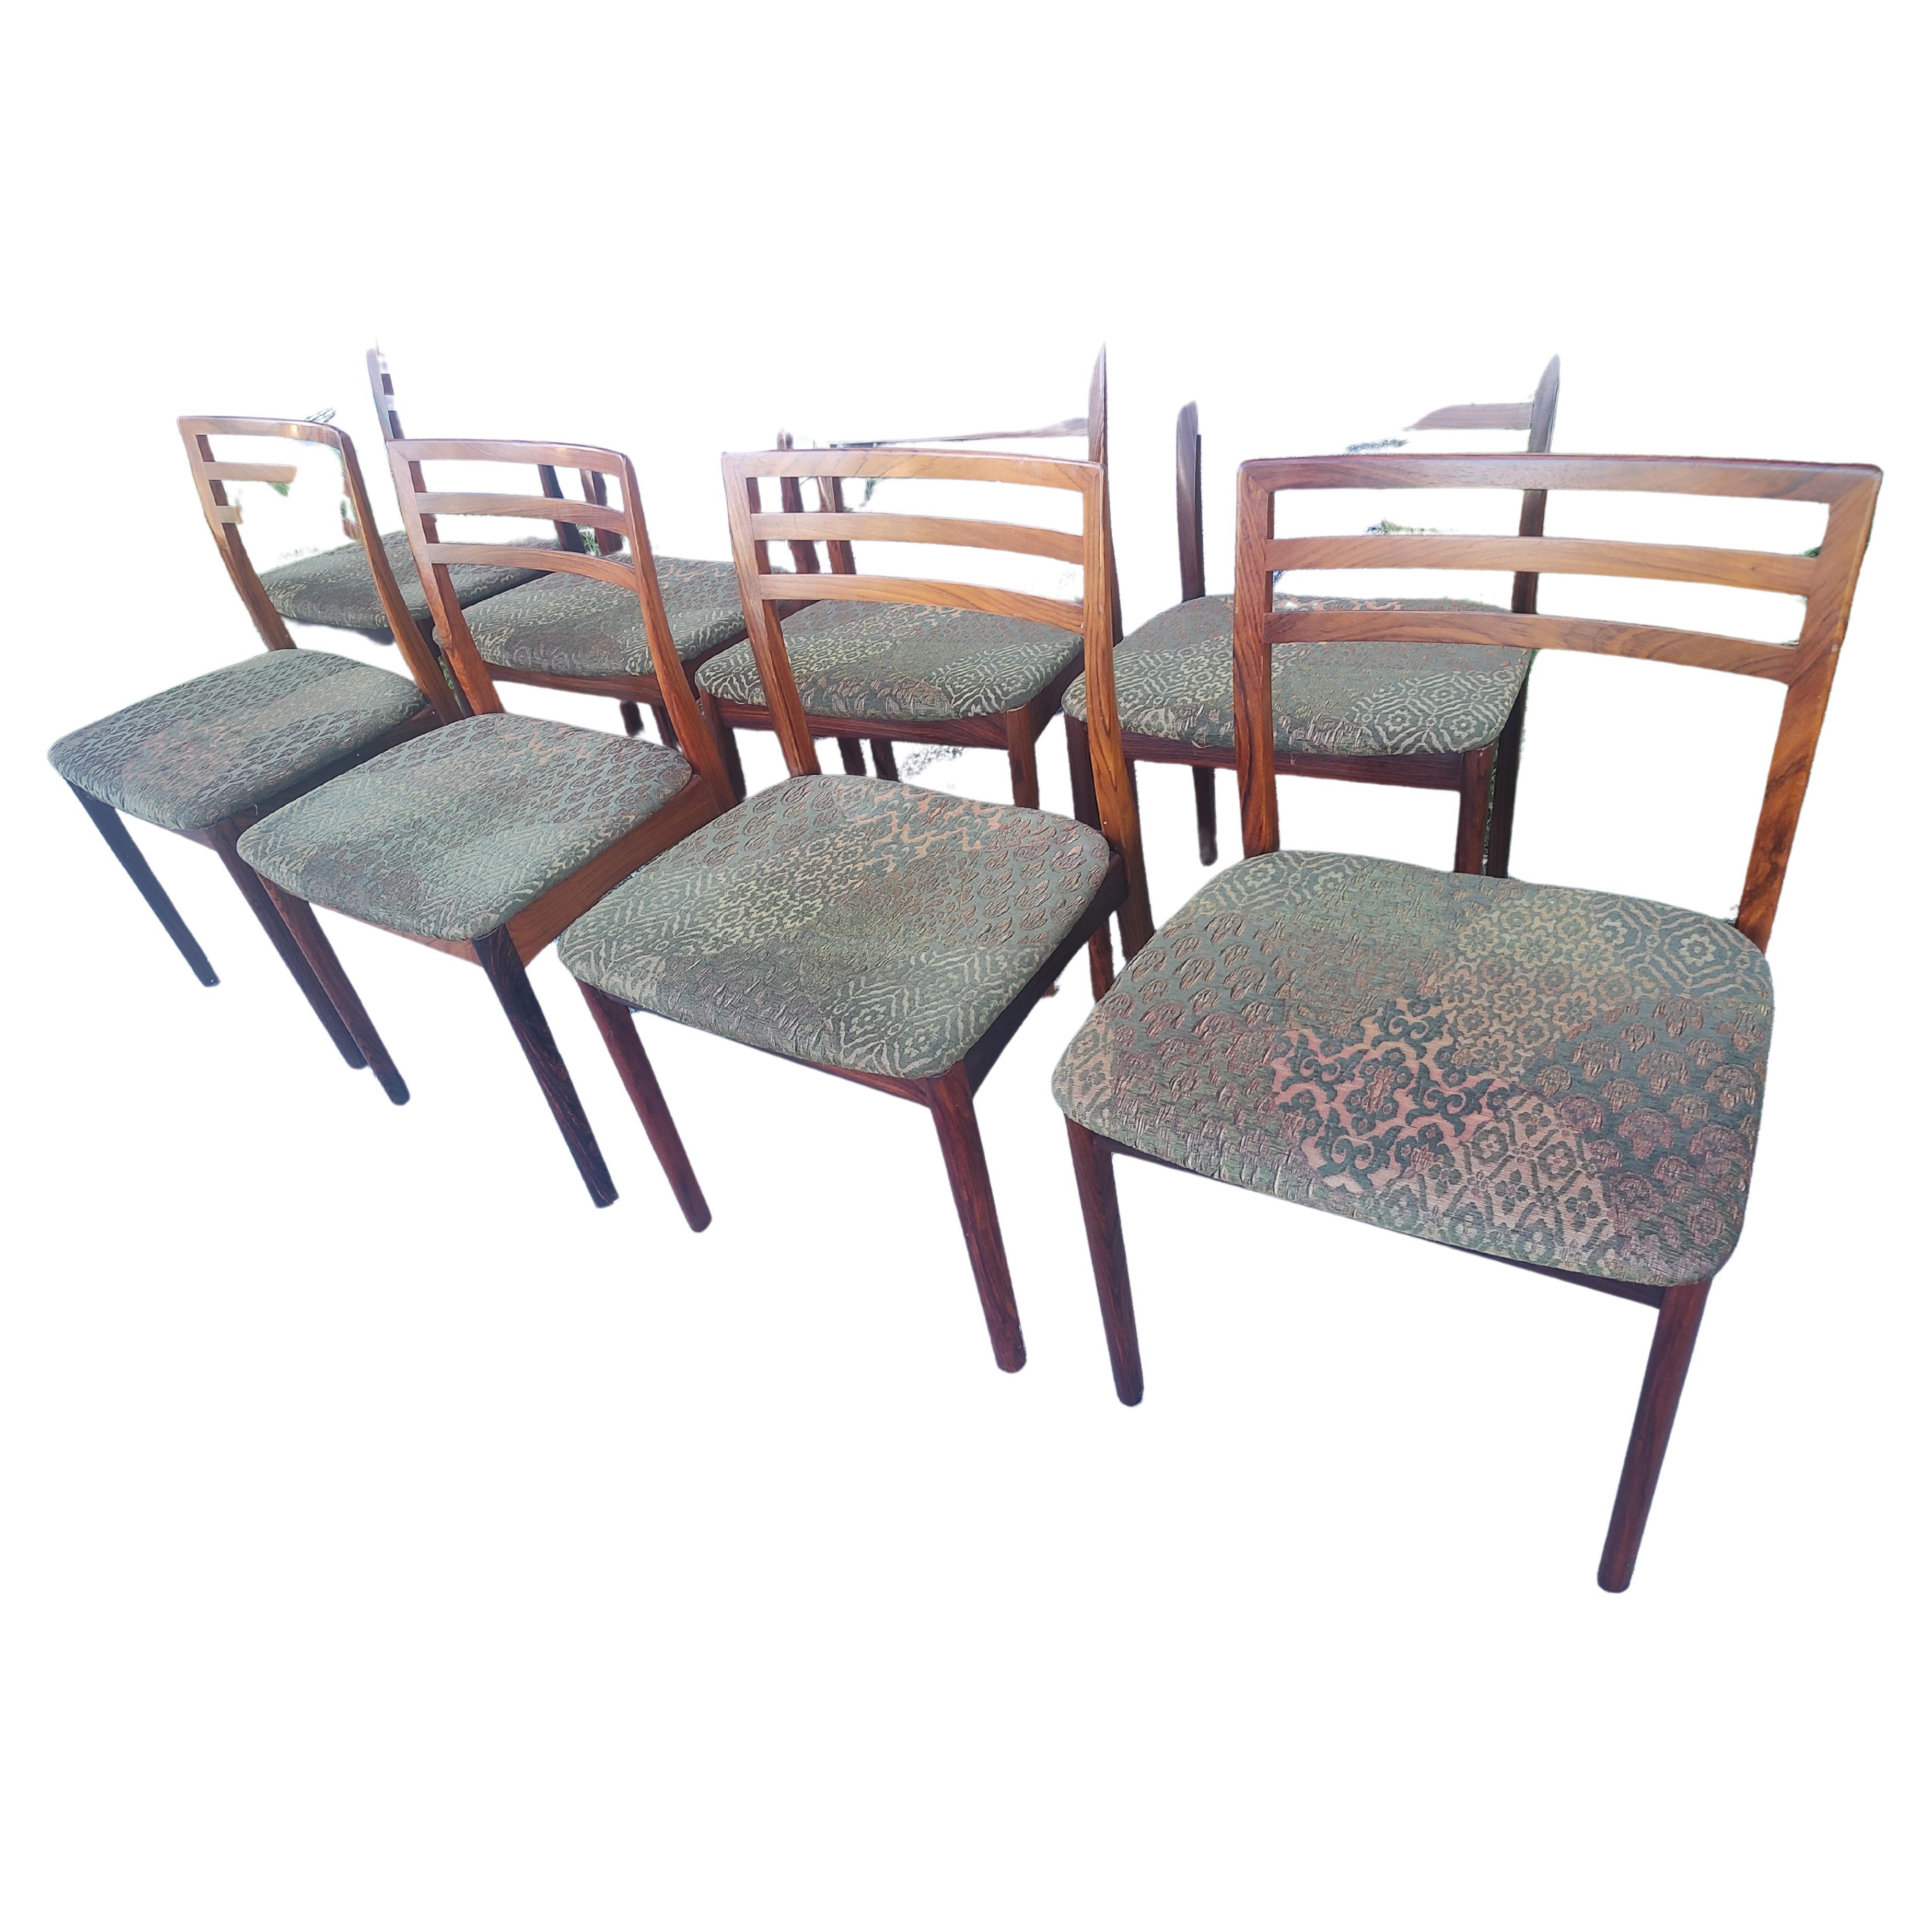 Eight Mid Century Danish Rosewood Ladderback Dining Chairs by Niels Moeller In Good Condition For Sale In Port Jervis, NY